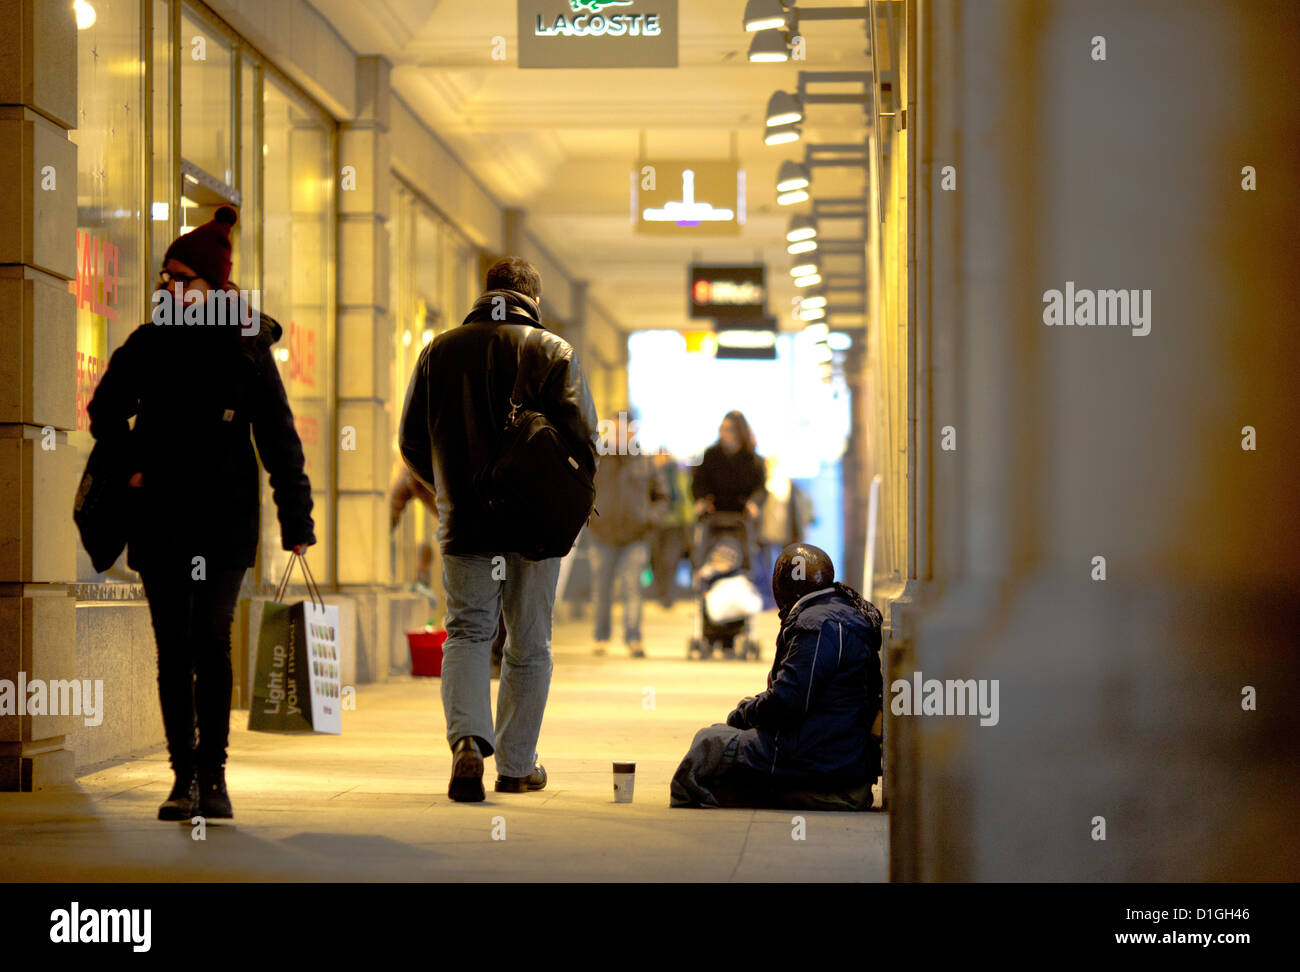 Homeless People Berlin High Resolution Stock Photography and Images - Alamy